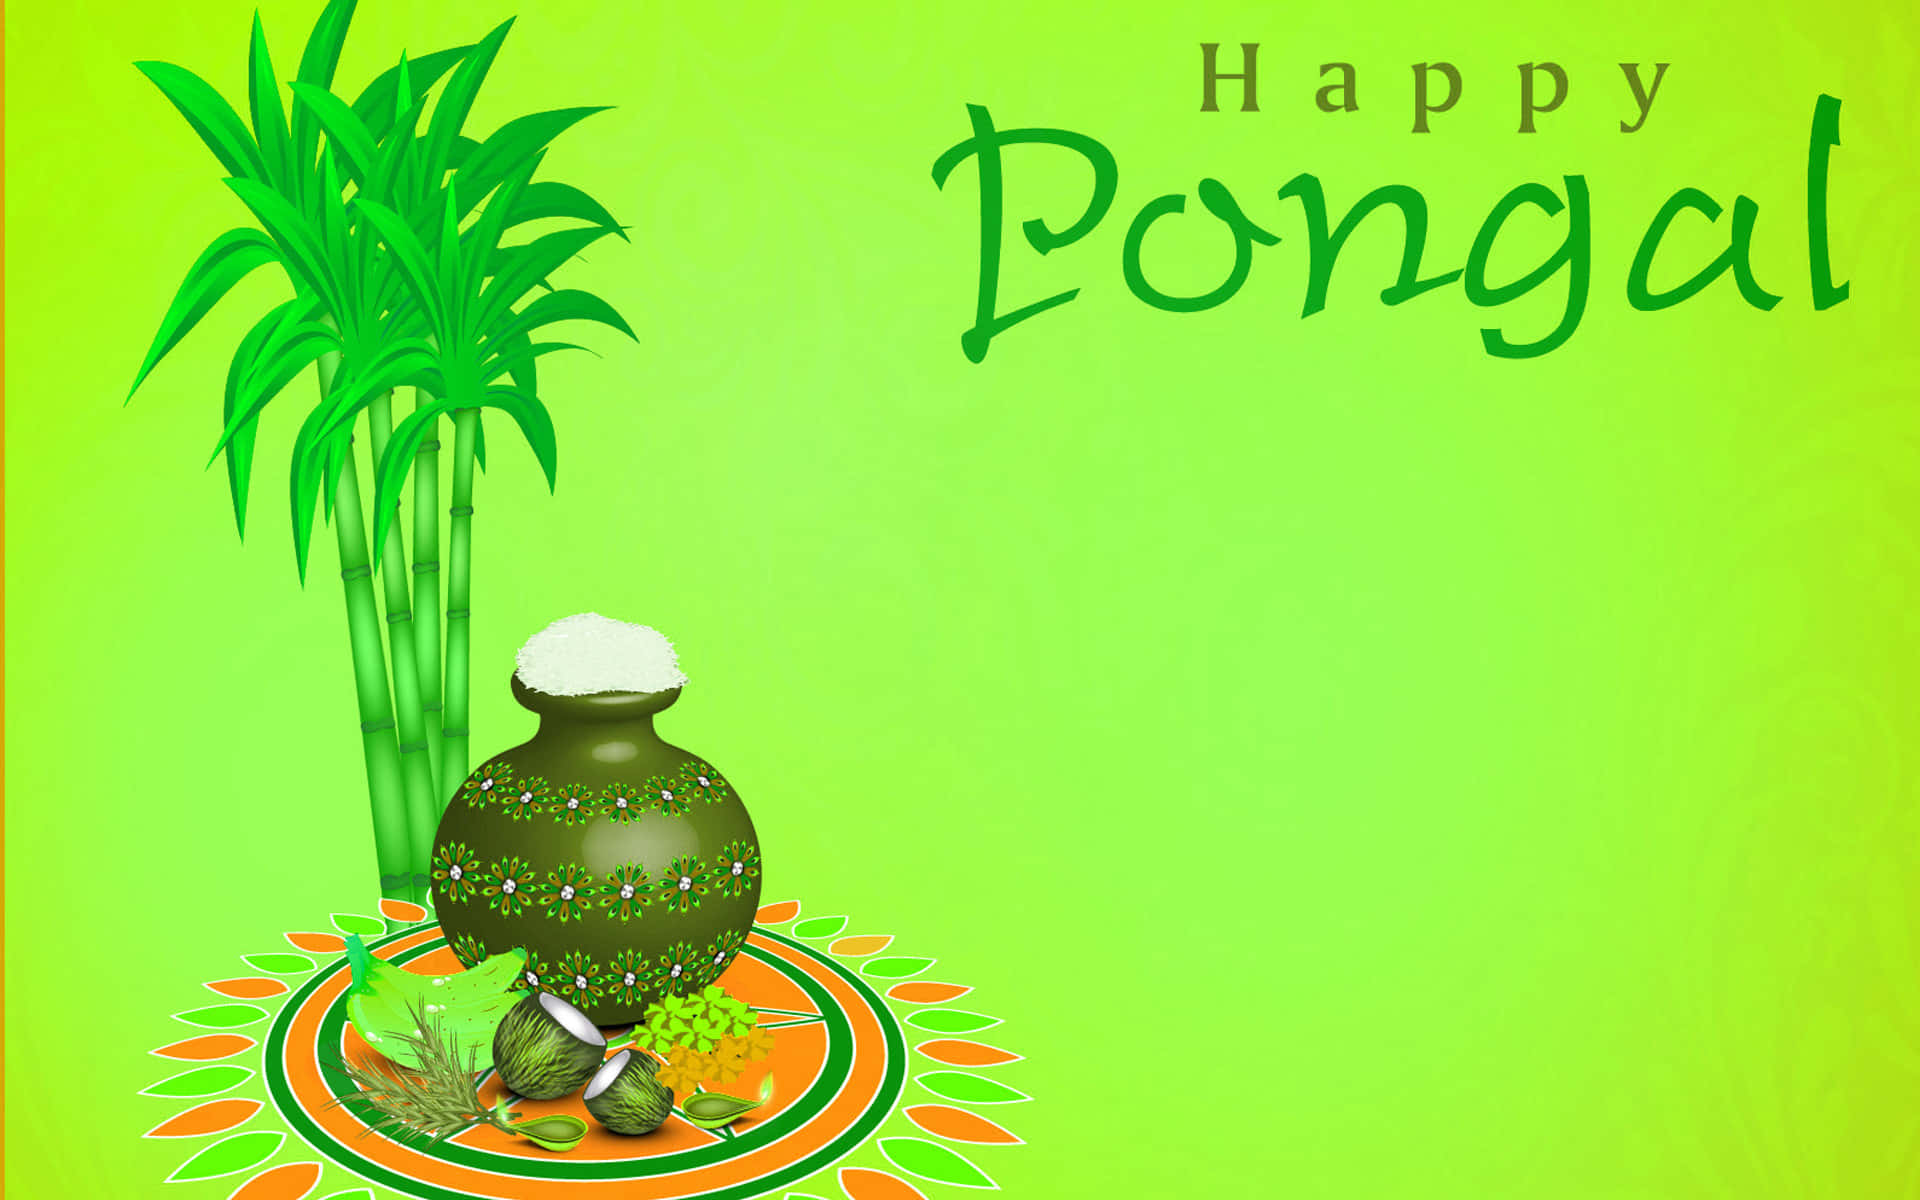 Celebrate the Harvest Festival of Pongal with Joy and Gusto